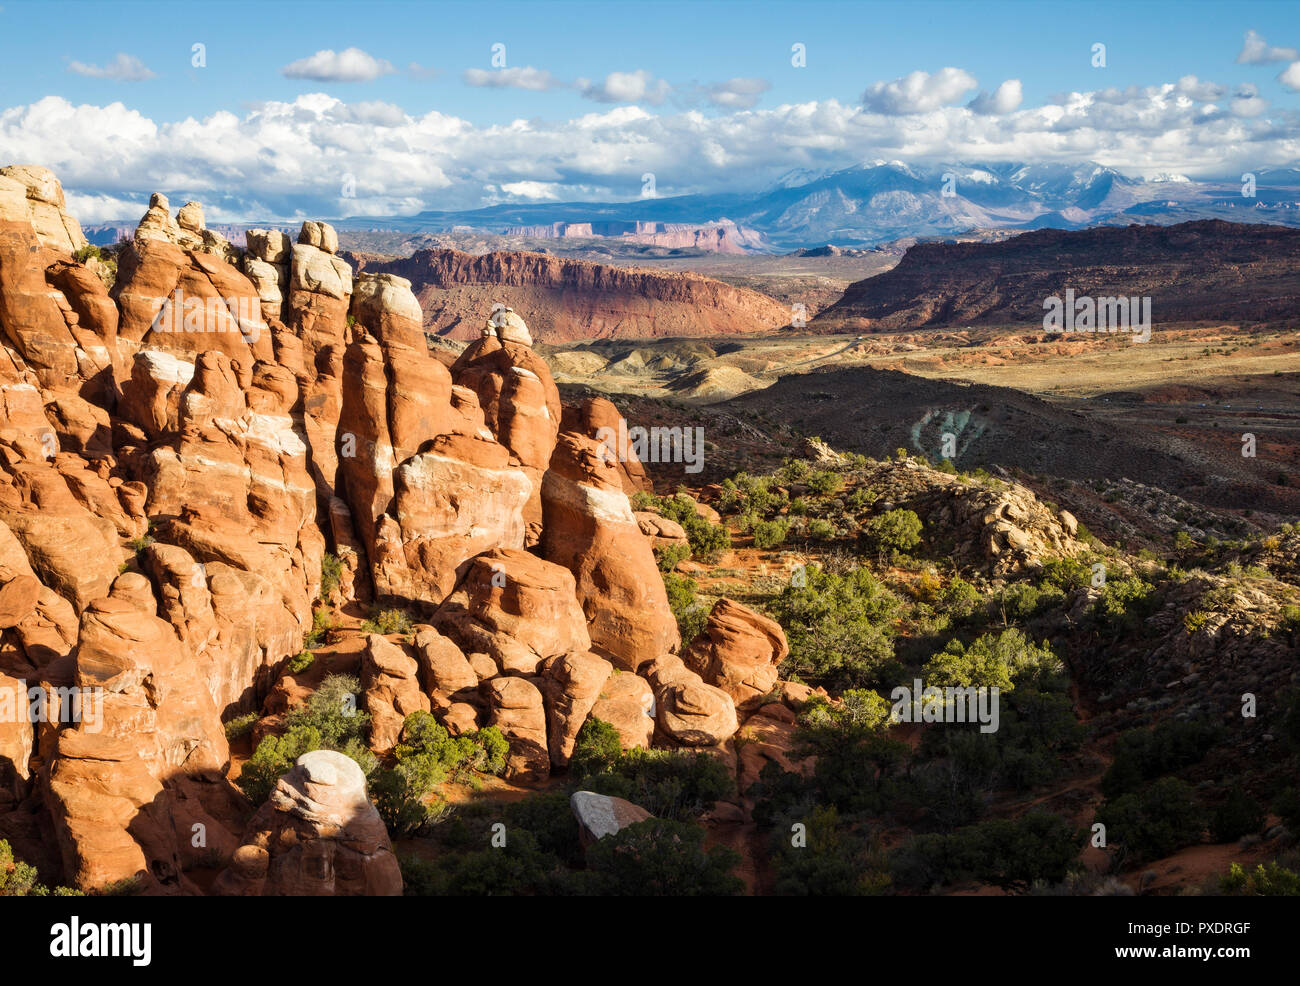 The rock formations of the Fiery Furnace in Arches National Park, Utah. Stock Photo